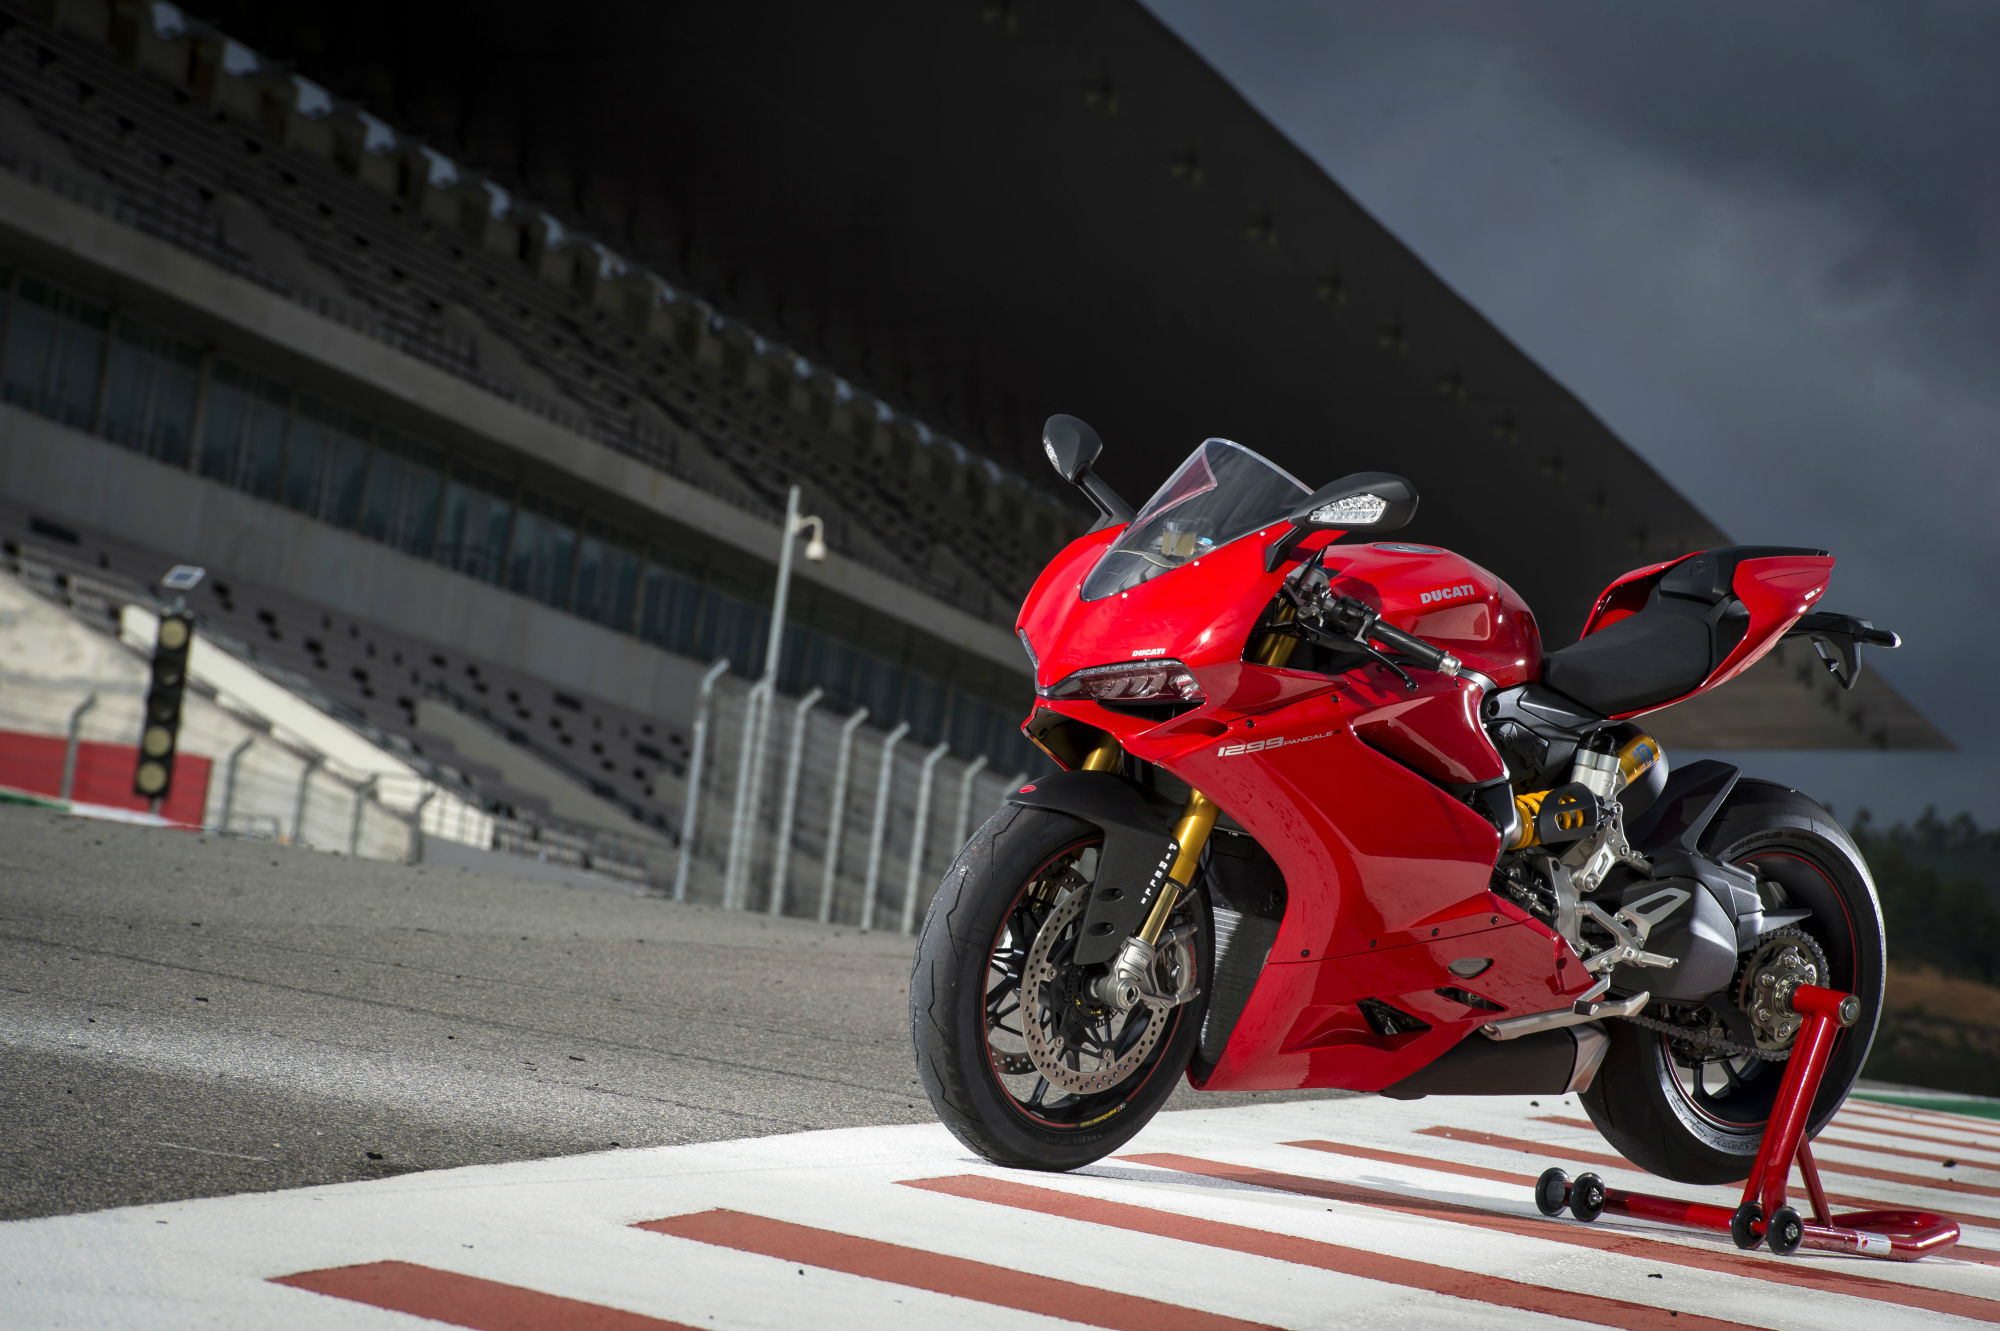 Ducati 959 Panigale and Hypermotard 939 on the way